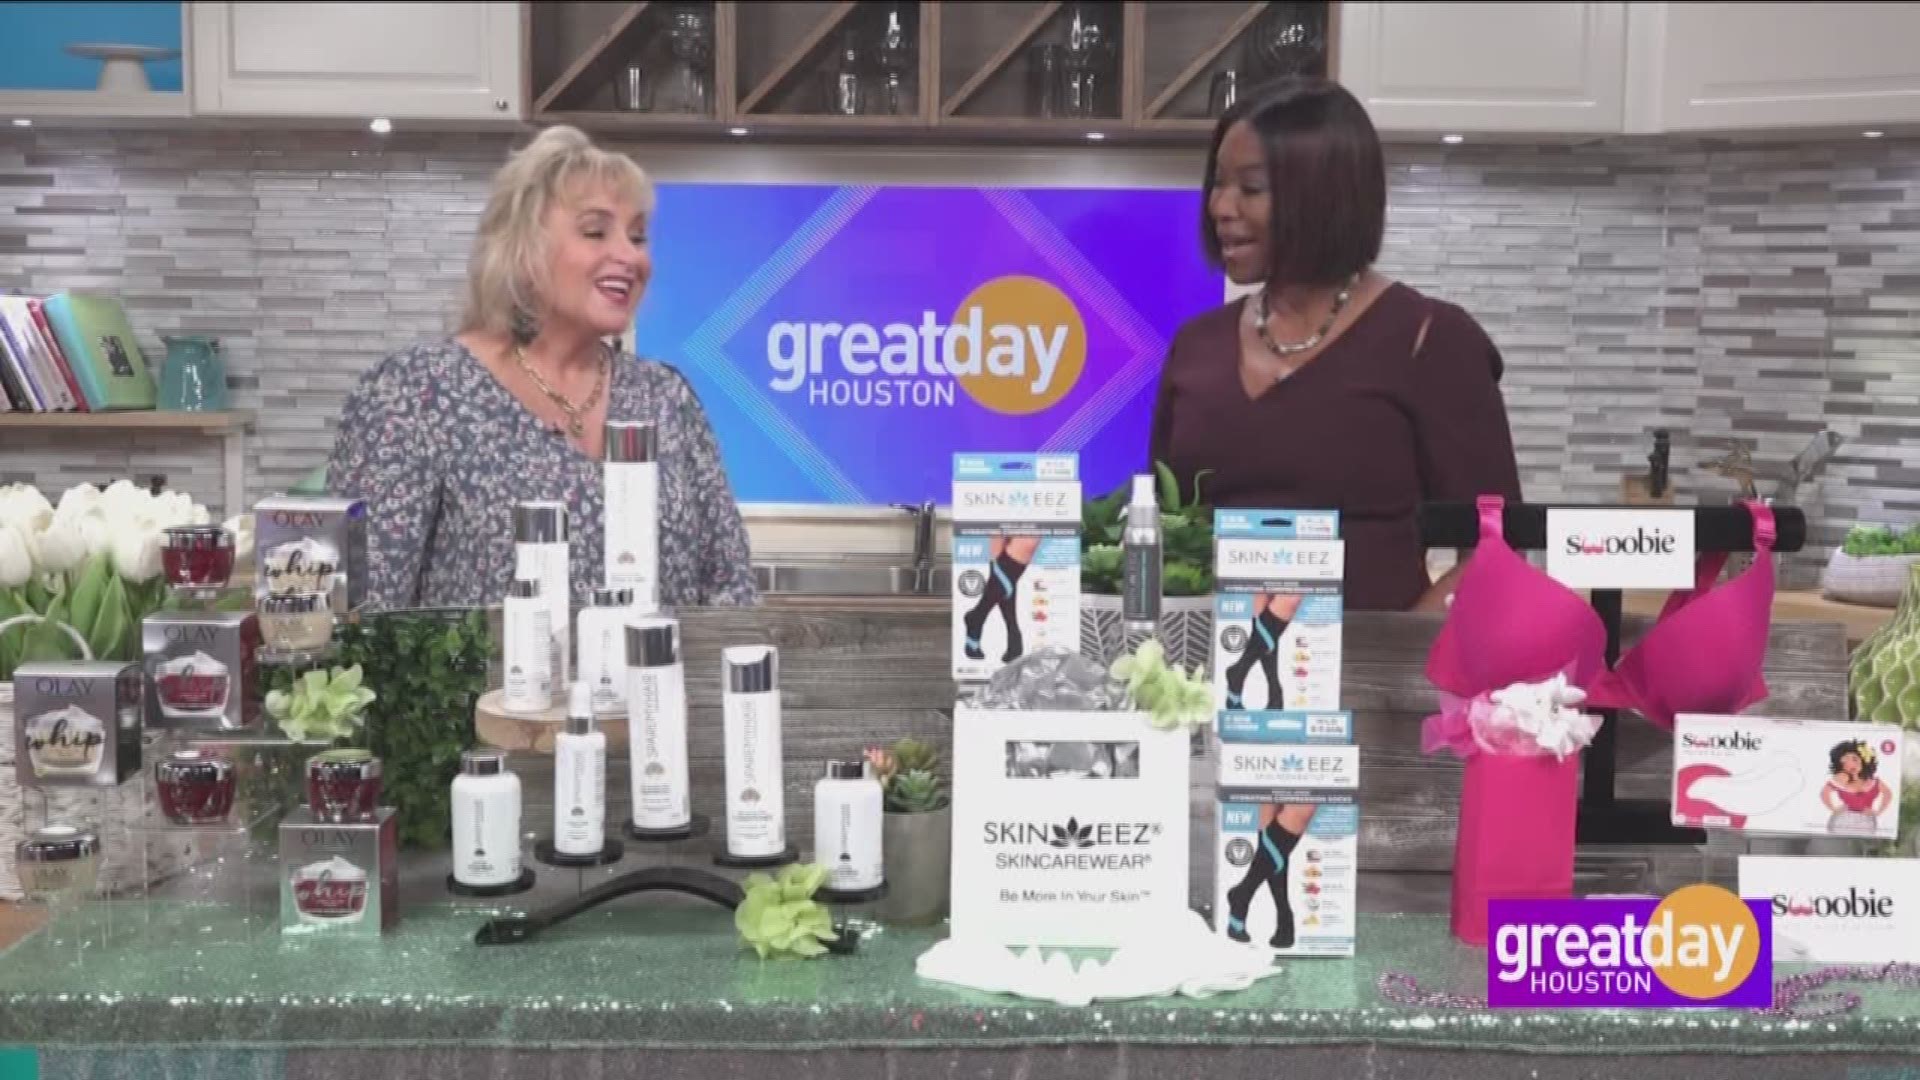 Lifestyle Expert Dawn McCarthy stopped by Great Day Houston with a variety of products owned or created by women.